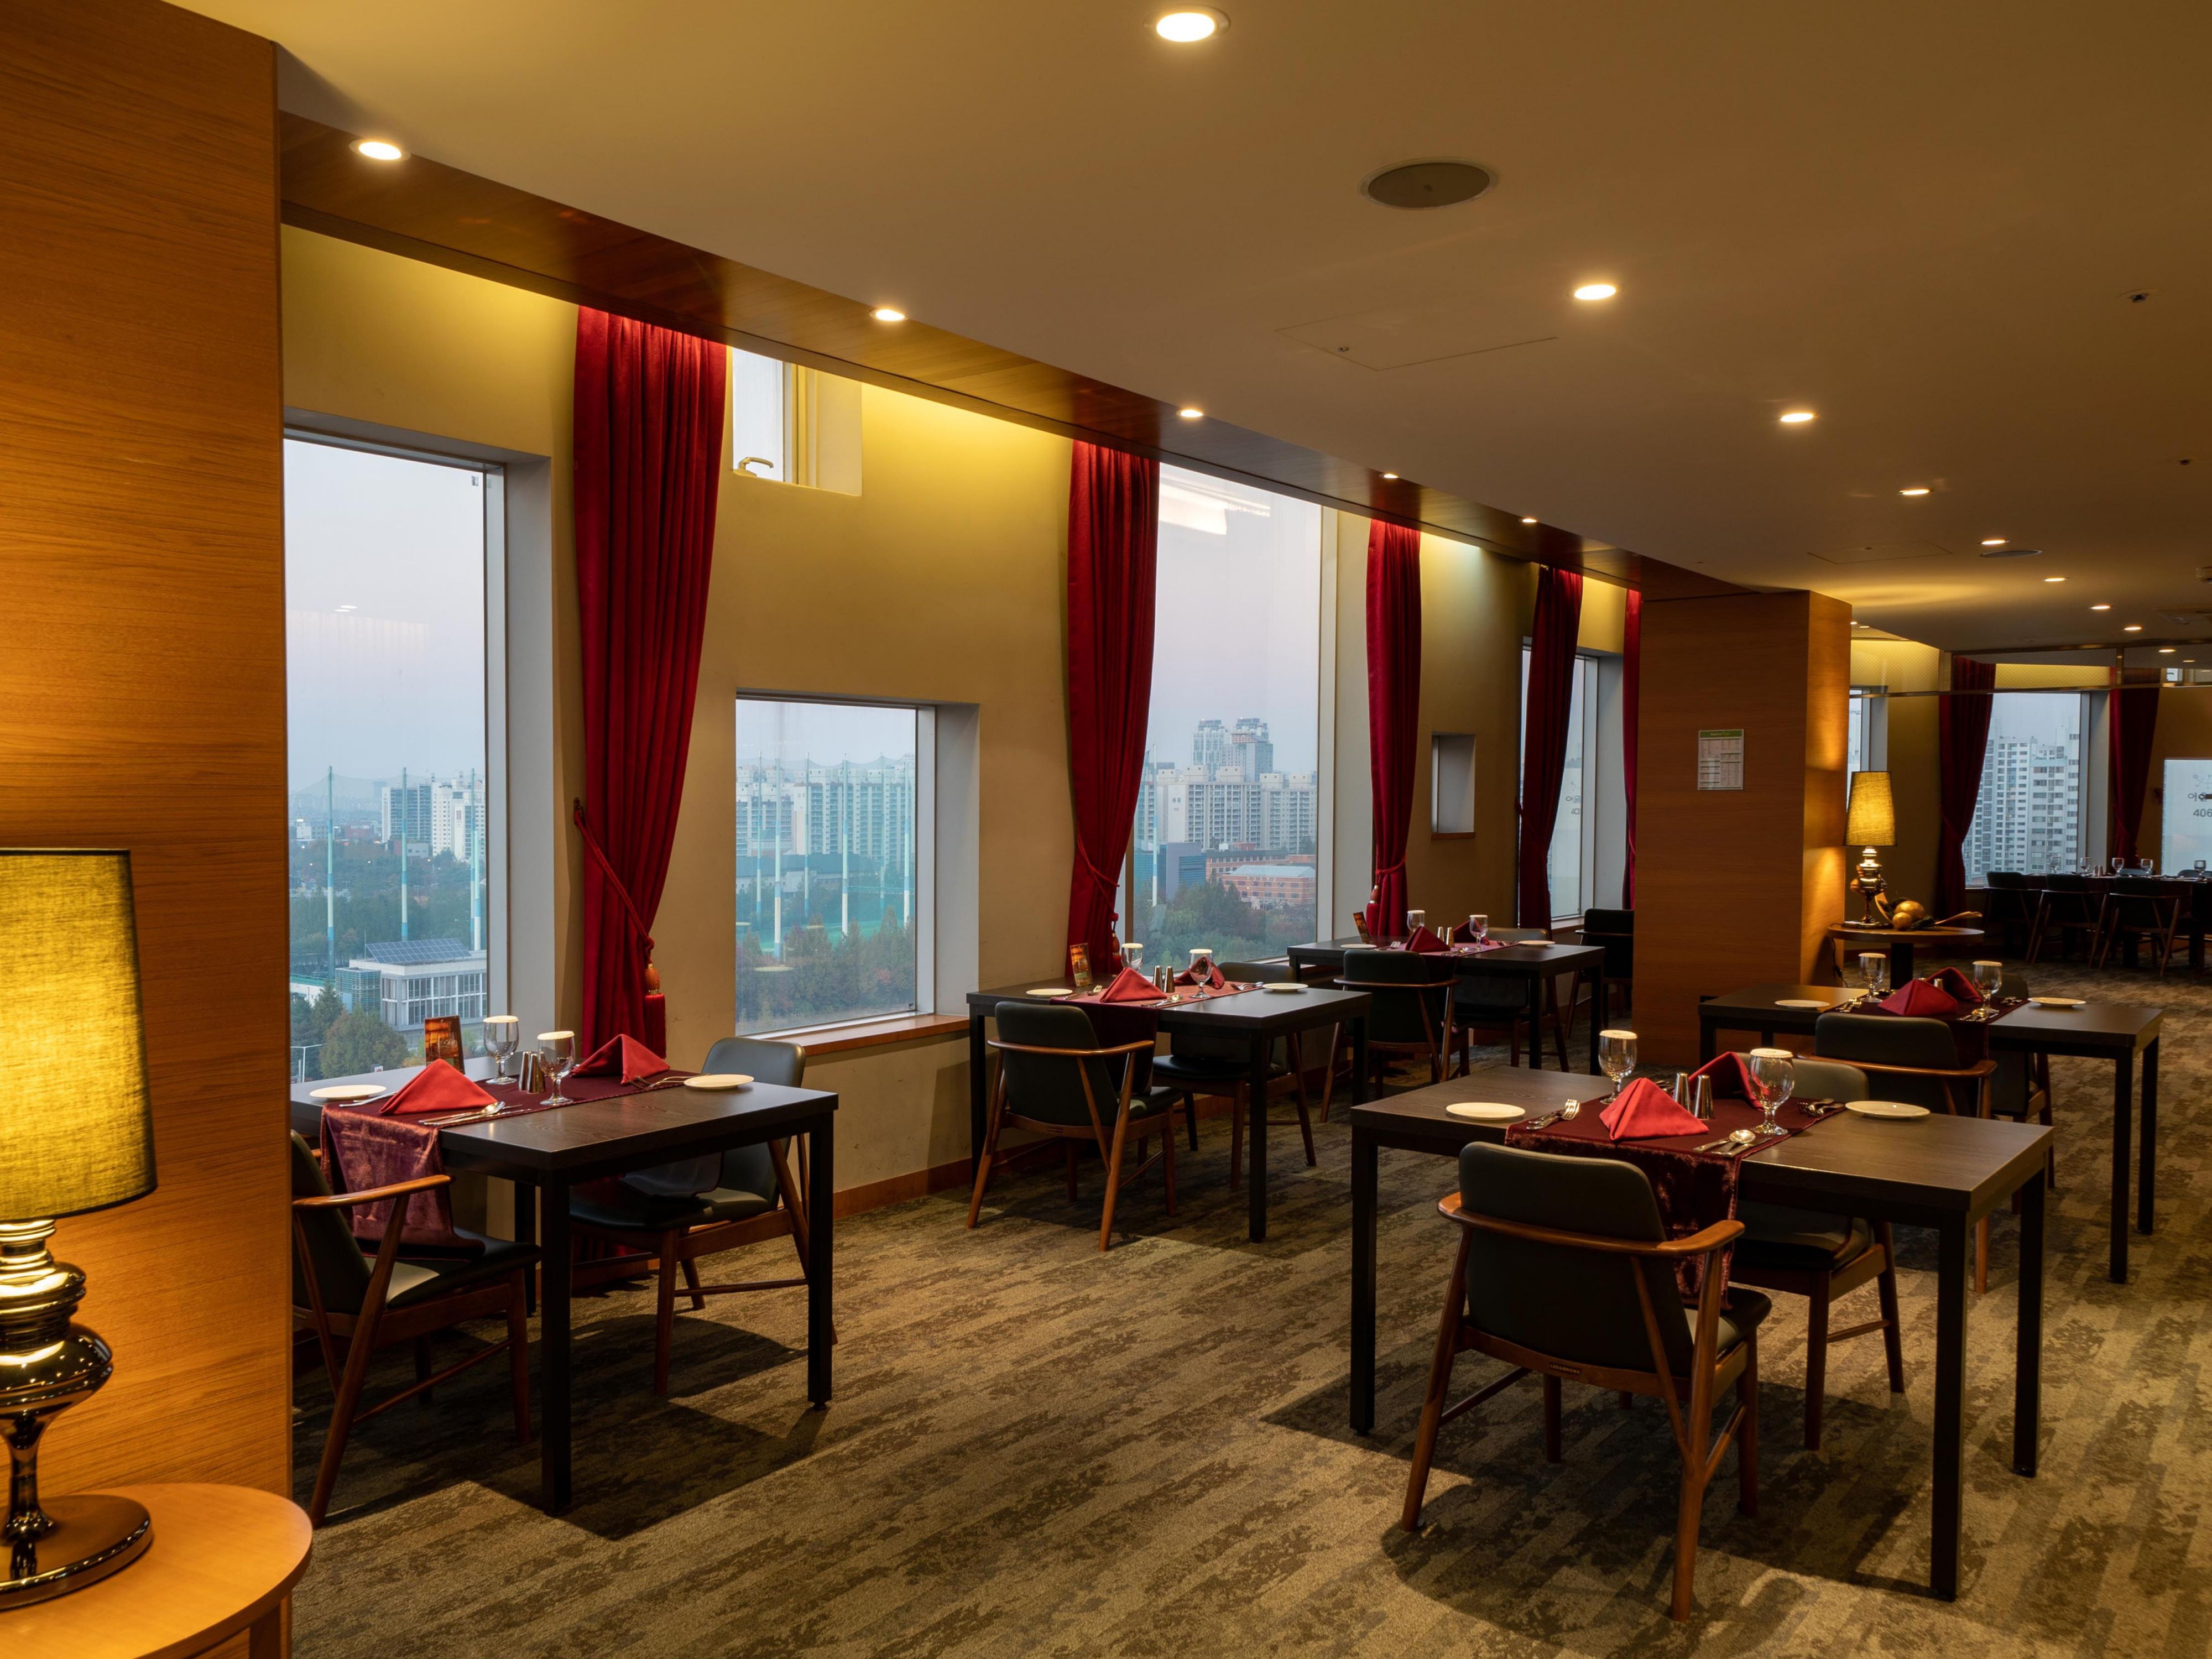 Situated on the 10th floor, La Place Grill & Bar provides a splendid night of Gwangju. Savour European style seasonal course dinner prepared by Executive chef, complemented with the perfect wine and whiskey recommended by a professional
sommelier.